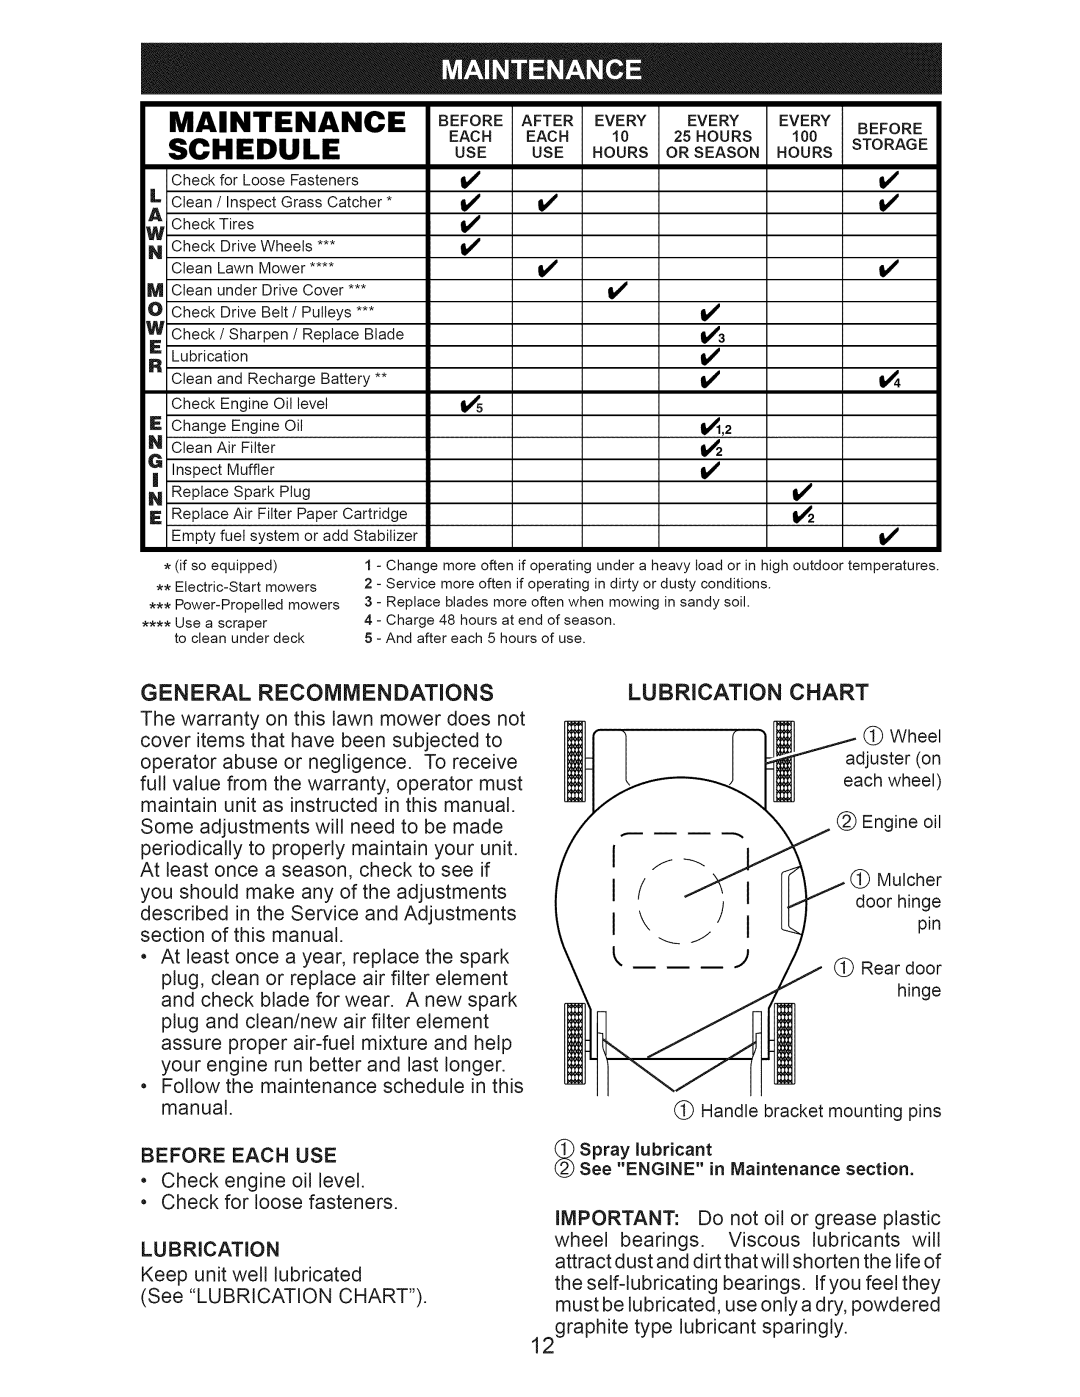 Craftsman 917.374090 manual Maintenance, Schedule, Use Hours 